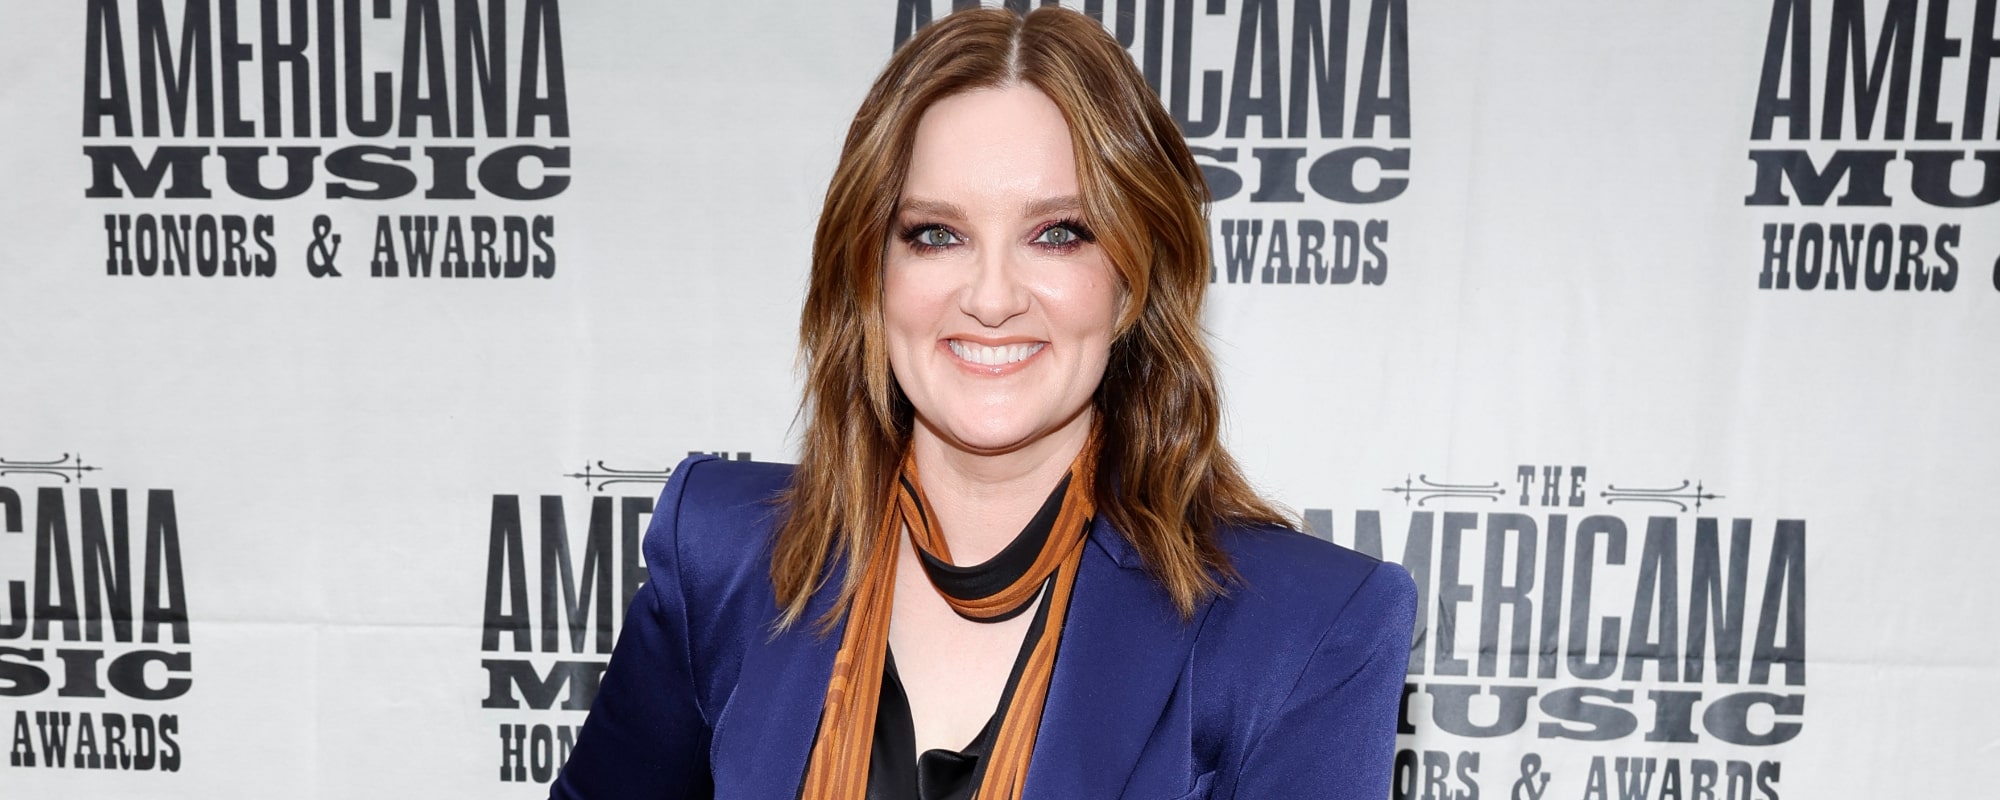 Brandy Clark Discusses Poignant Songs from Her Grammy-Nominated, Self-Titled Album